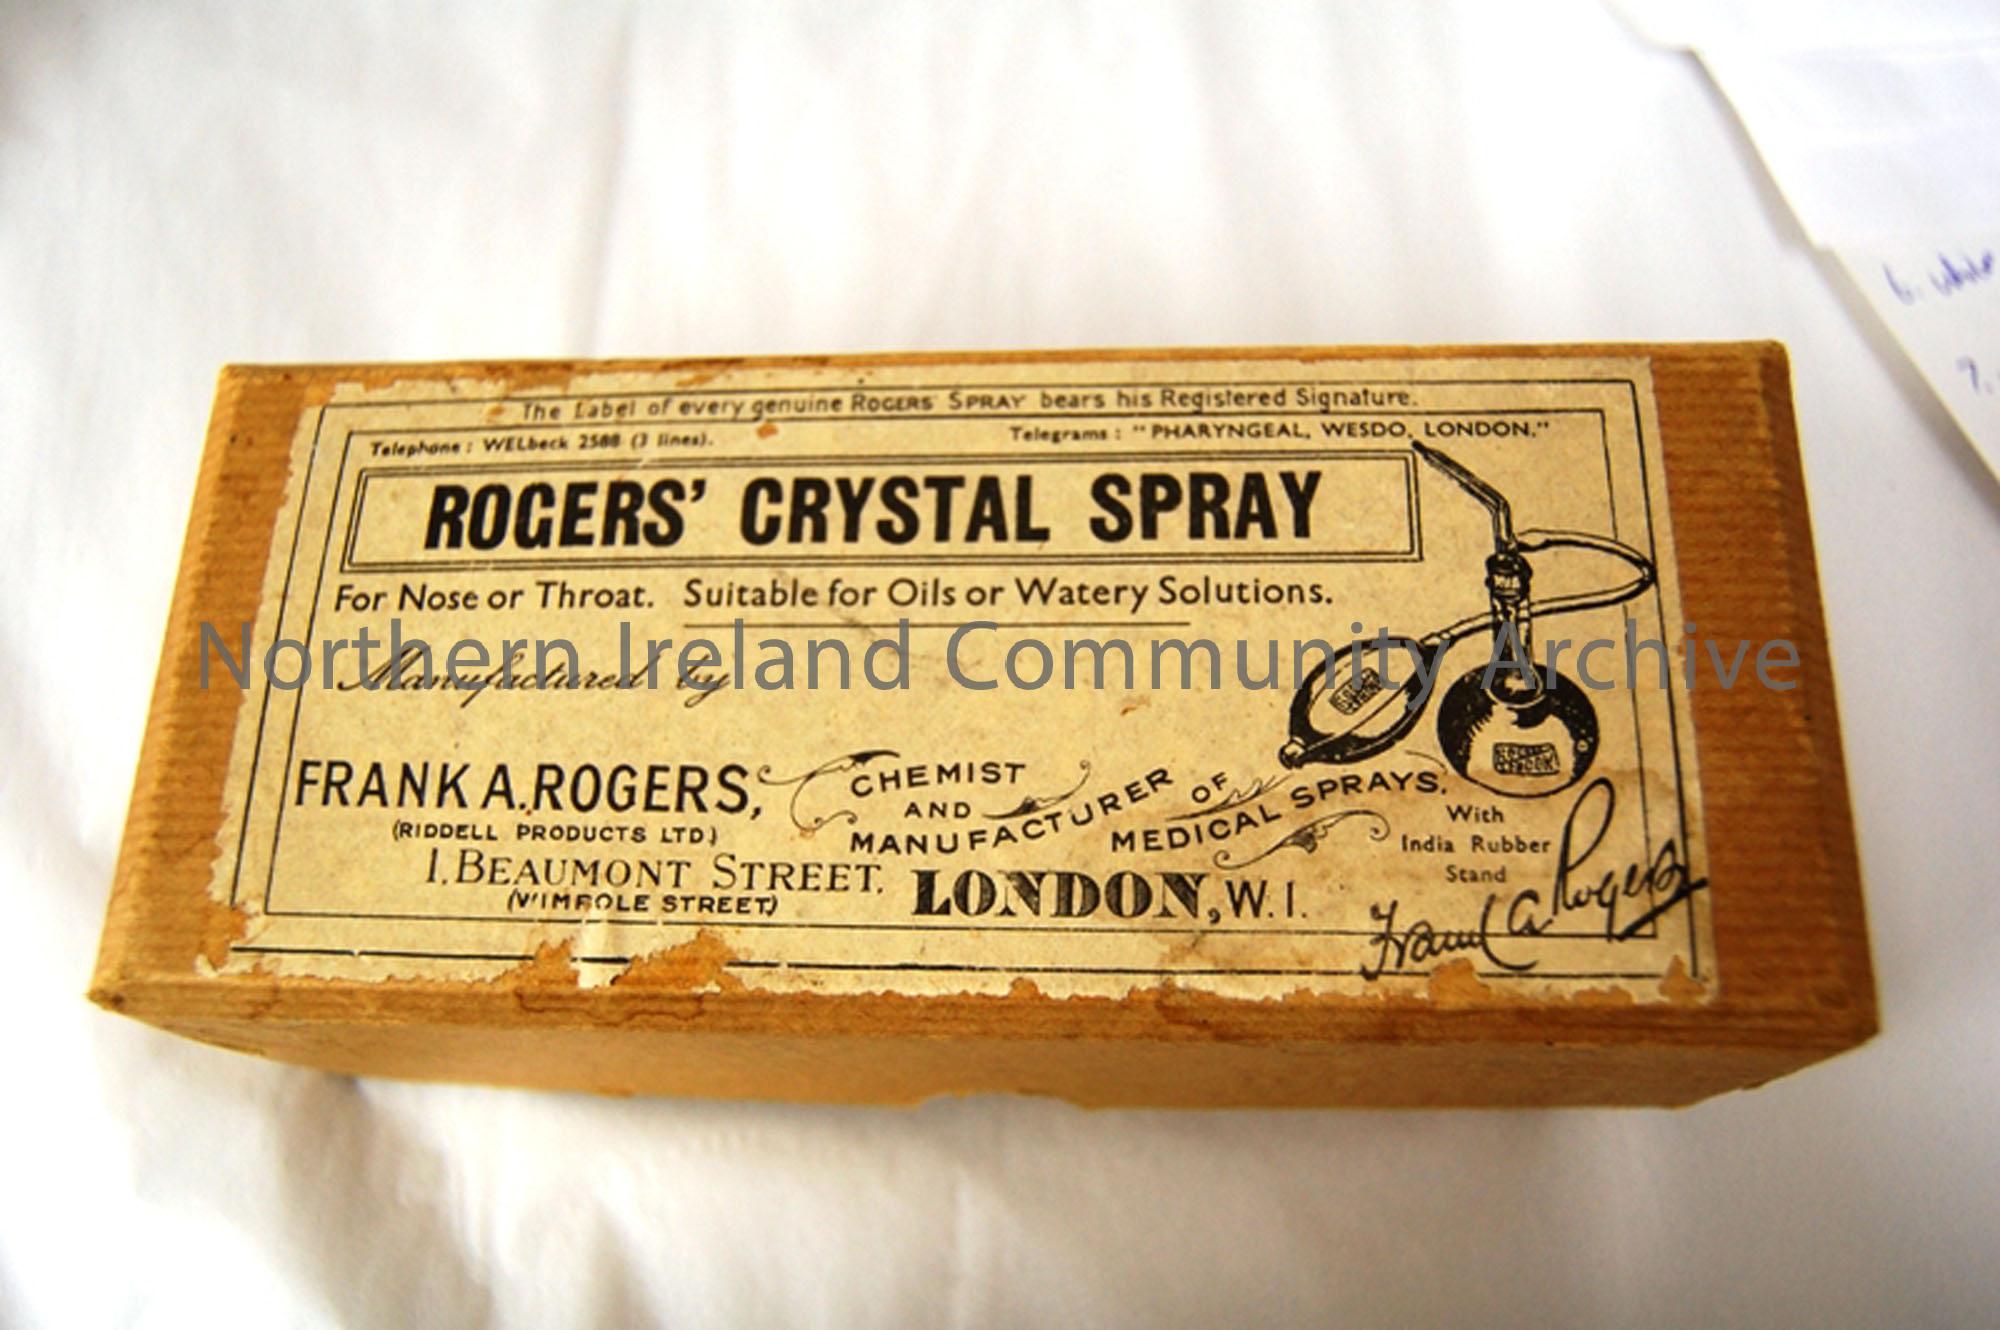 Roger’s crystal spray for nose or throat suitable for oils or watery solutions.